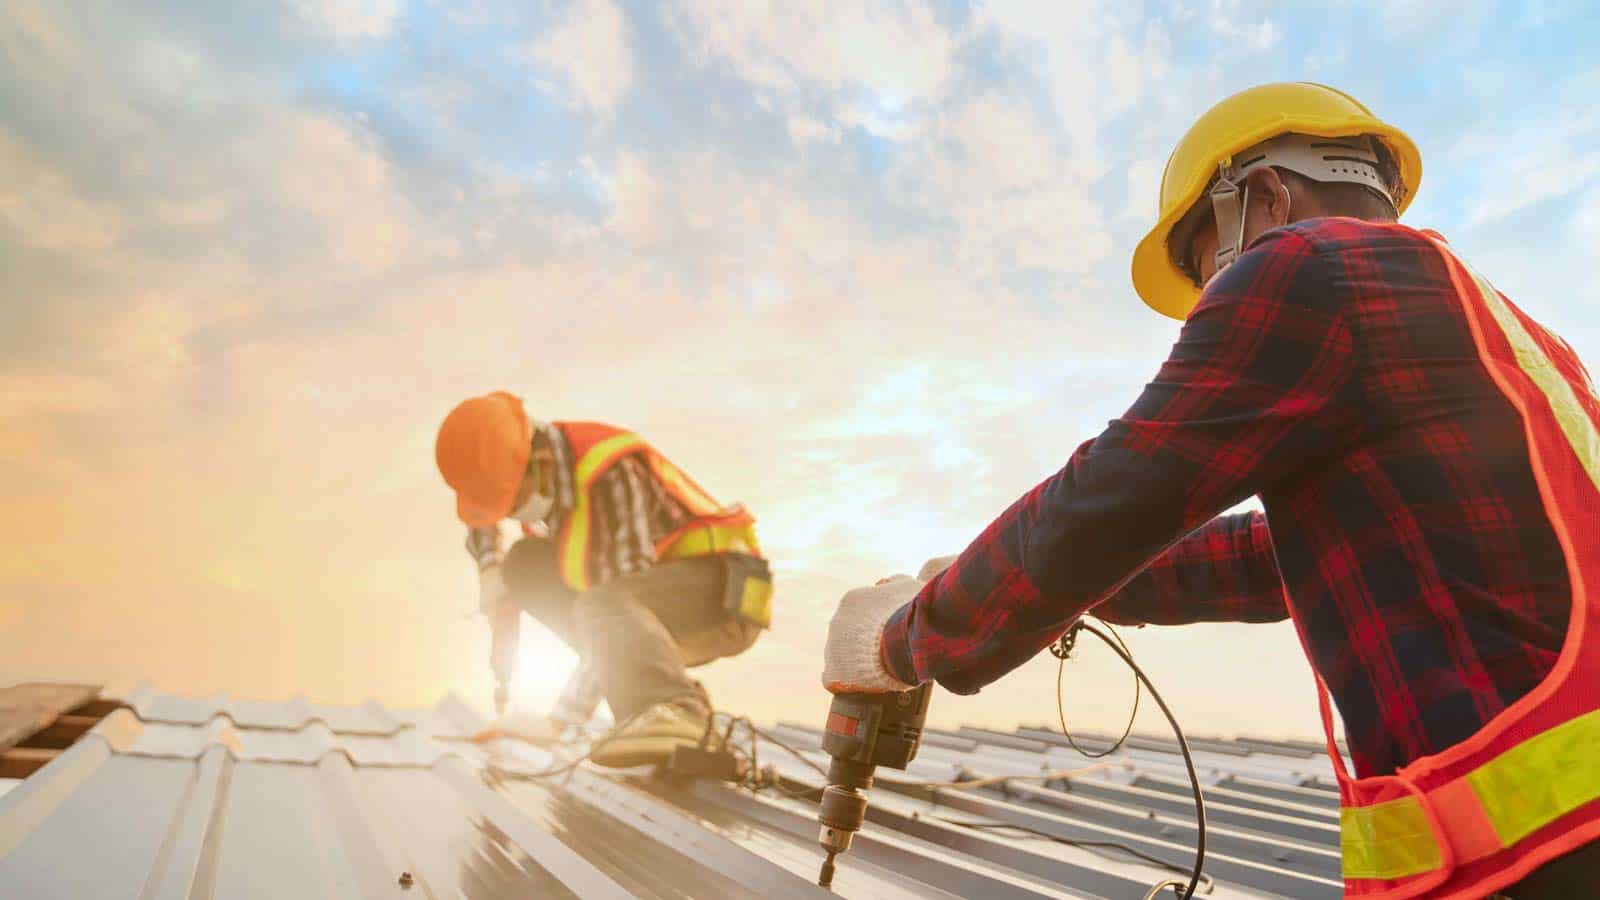 Ask a potential roofing contractor these questions and you’ll see if they know their stuff.